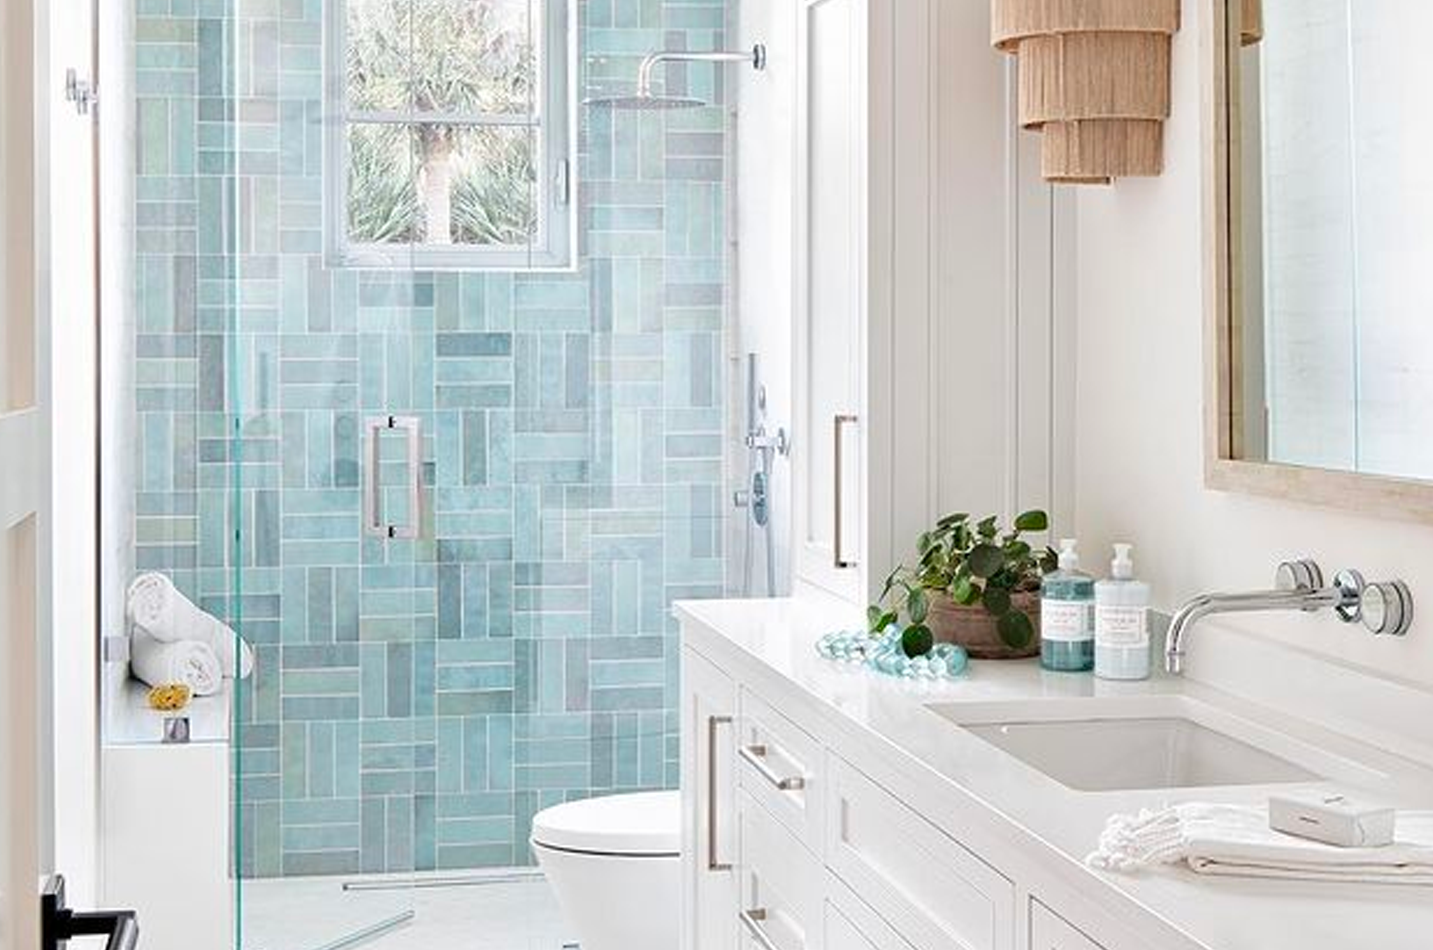 Blue patterned subway tile installed floor-to-ceiling in a walk-in shower.